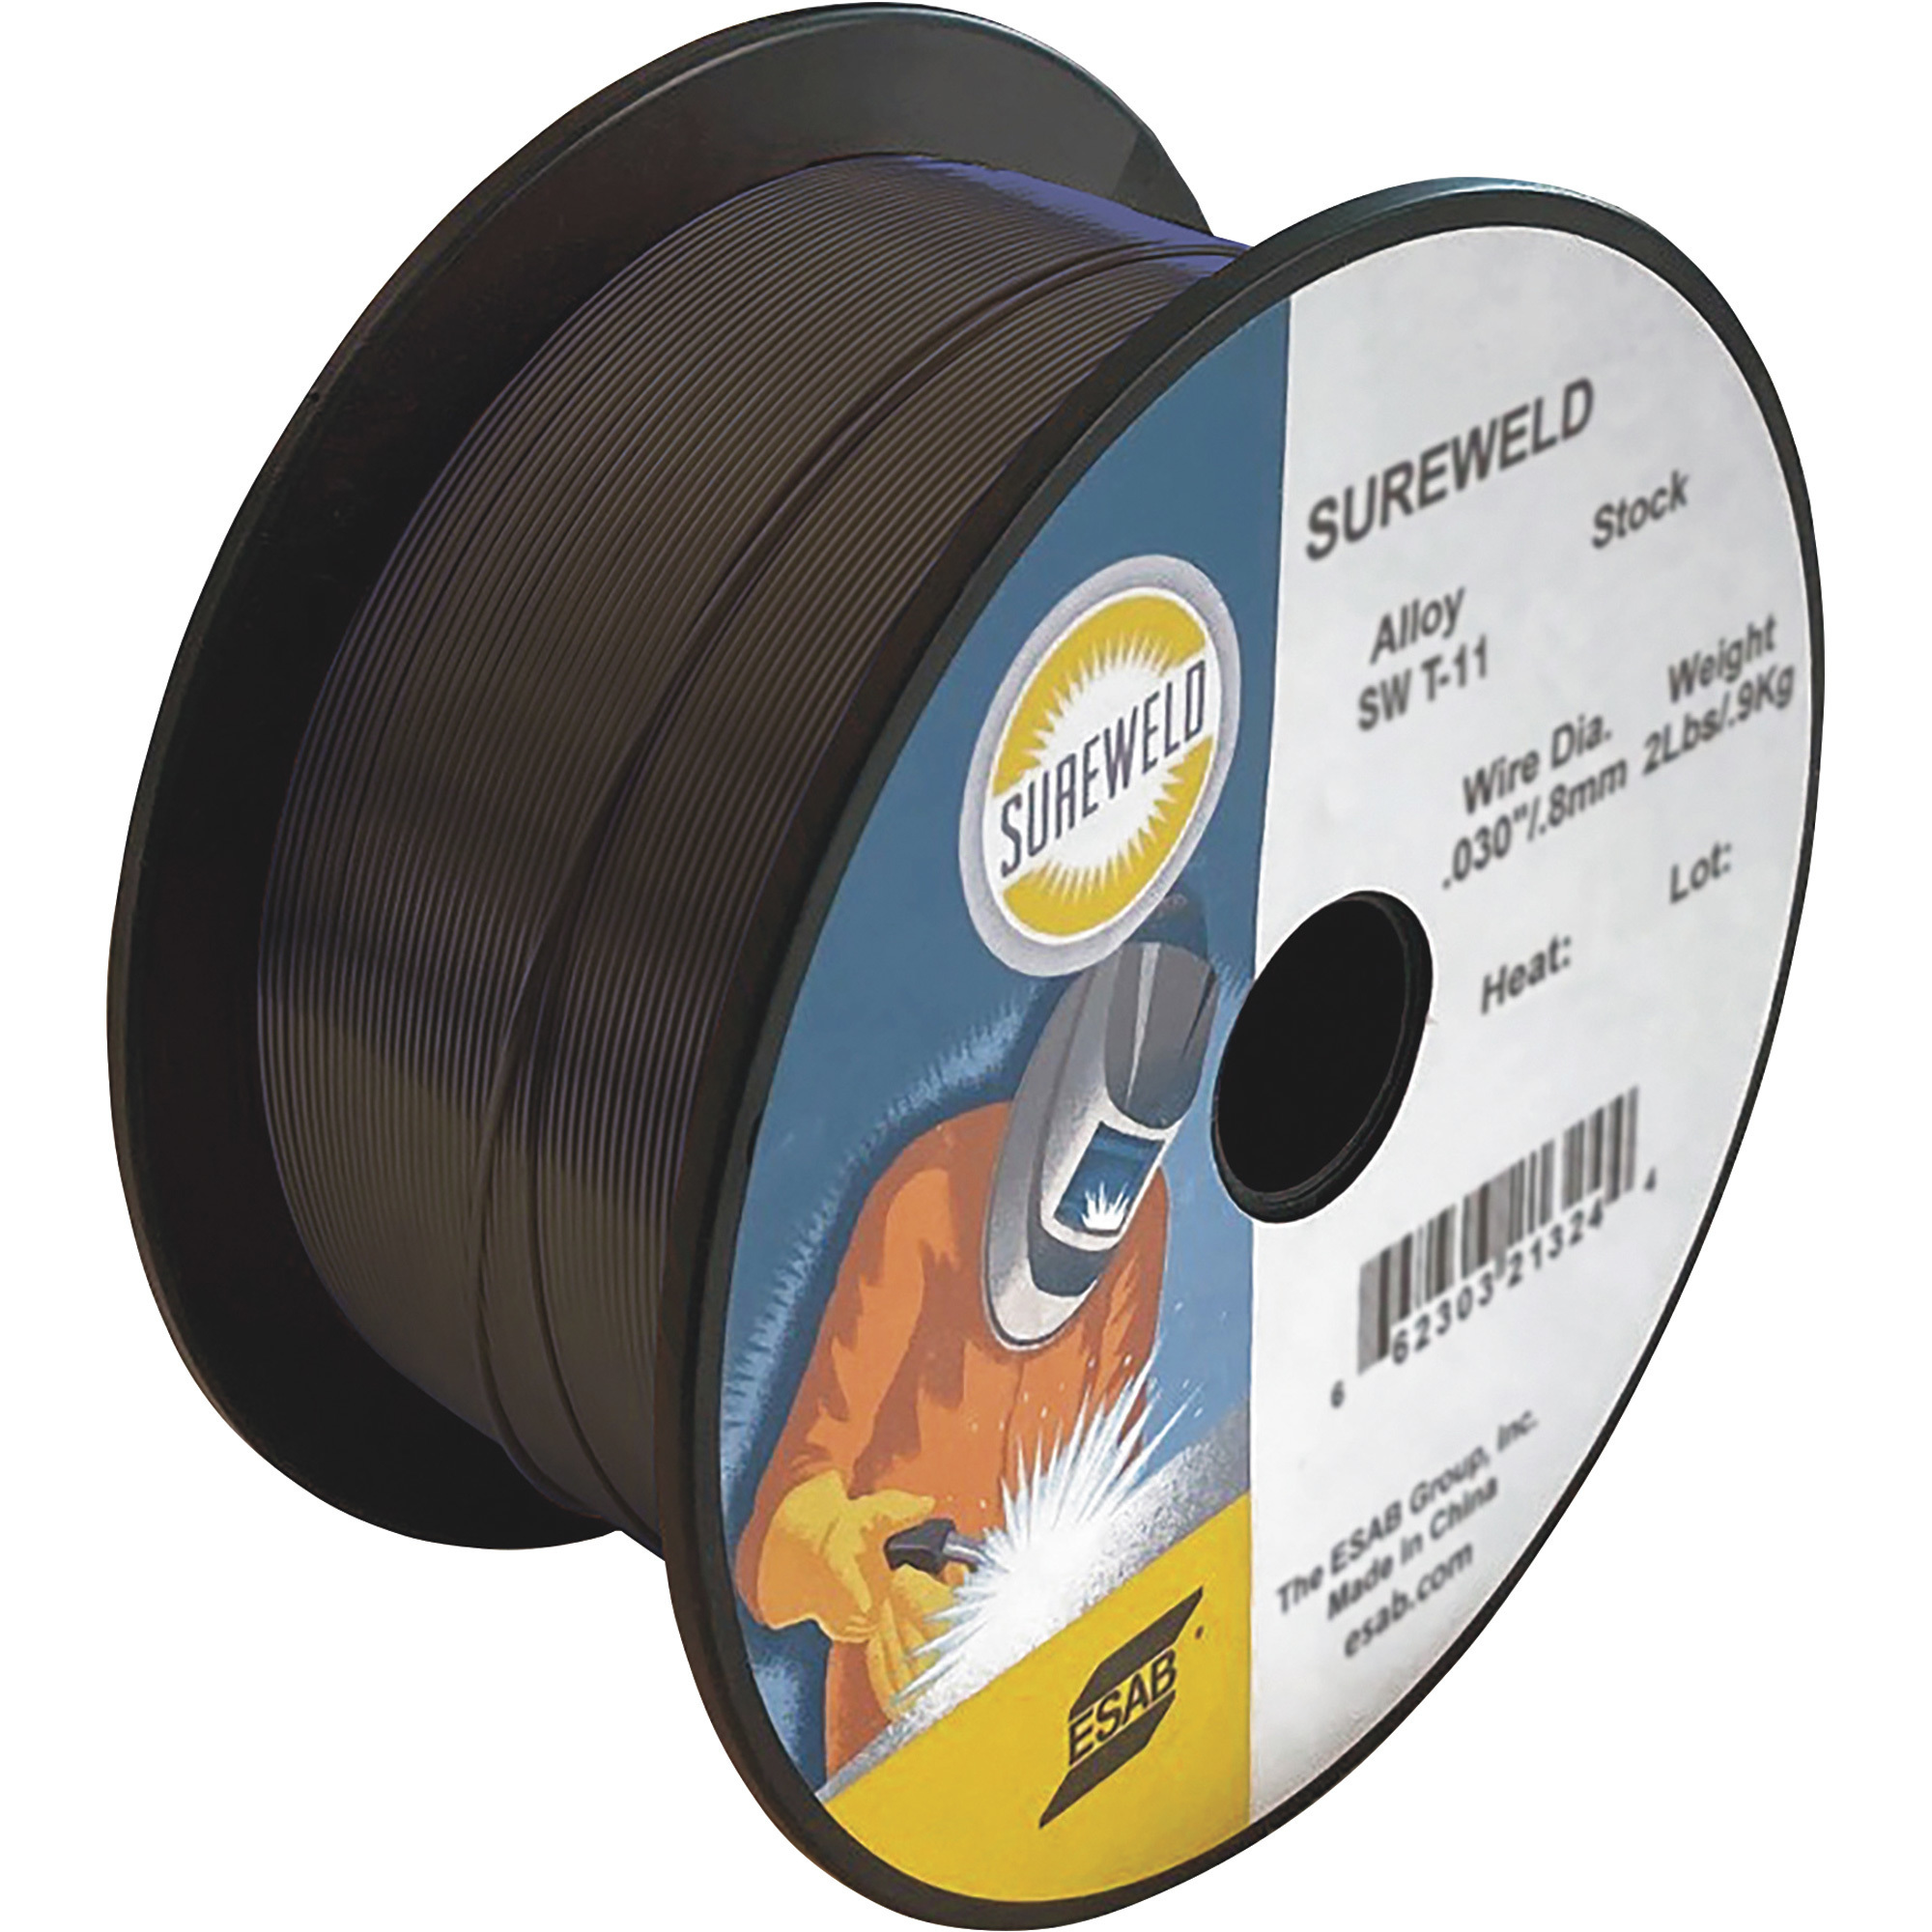 Sureweld T-11 All-Position Flux-Cored Welding Wire — 2-Lb. Spool, 0.030Inch, Model - ESAB 242203507